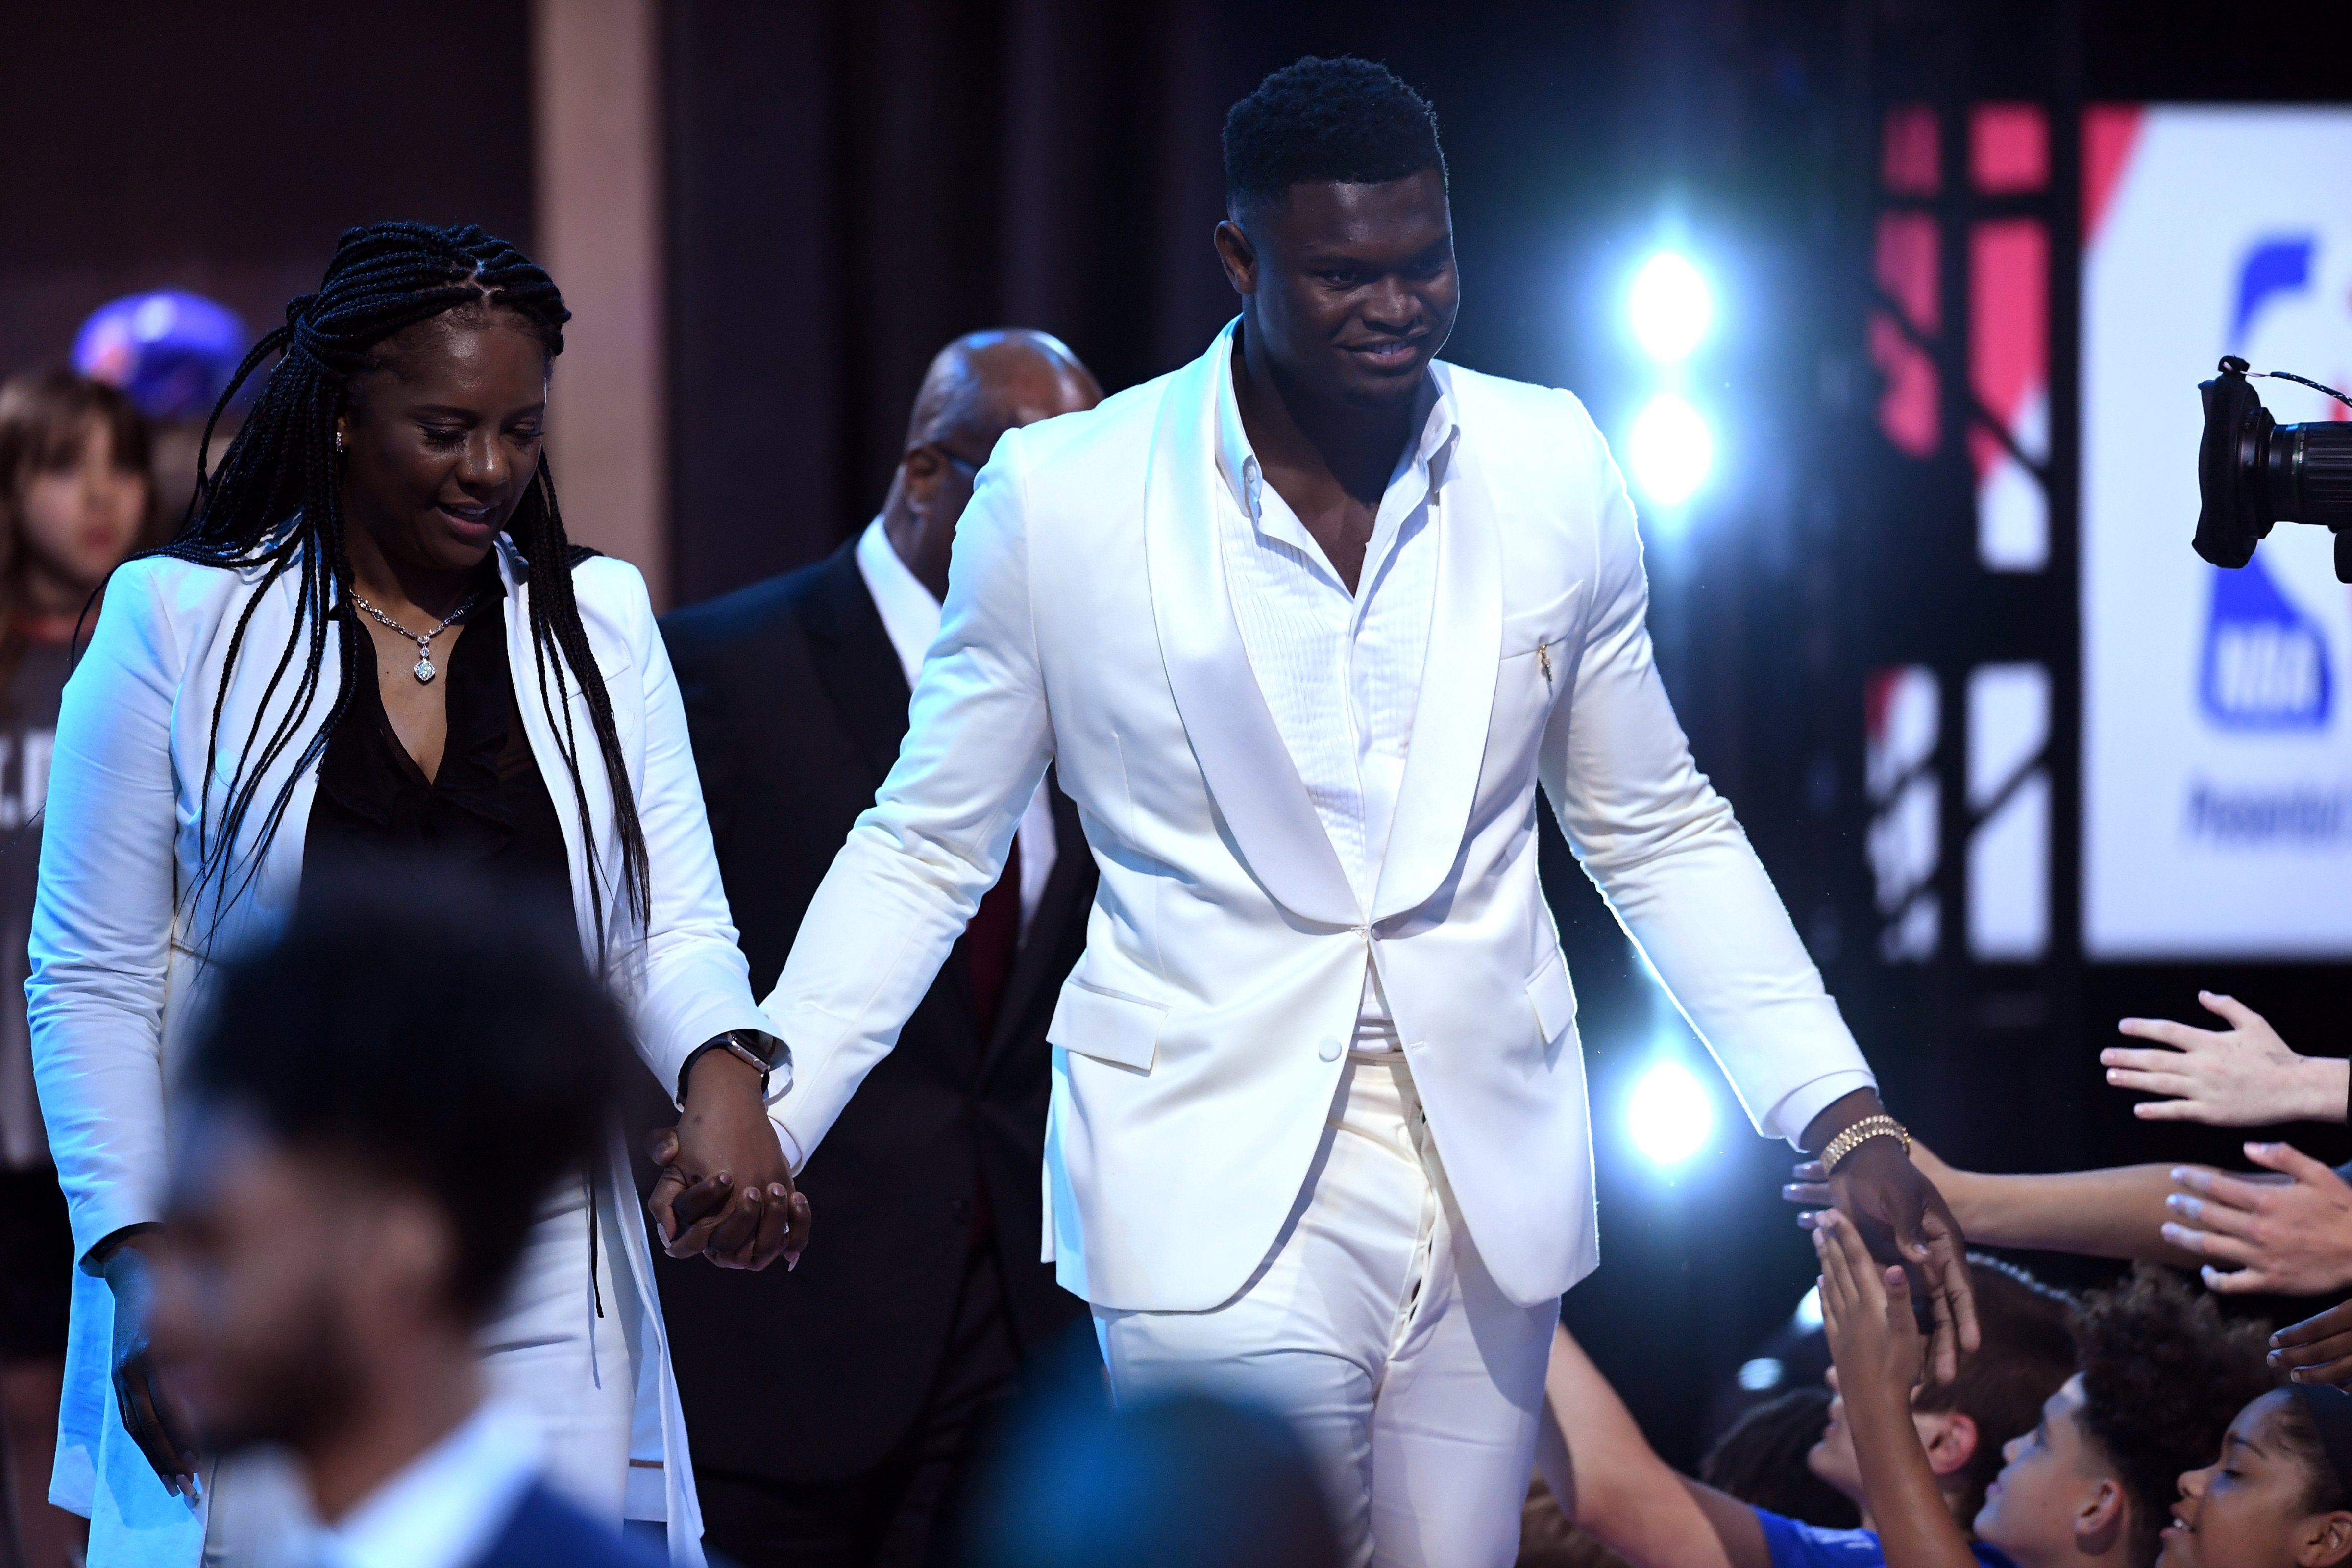 NBA Prospect Zion Williamson is introduced before the start of the 2019 NBA Draft at the Barclays Center on June 20, 2019 in the Brooklyn borough of New York City. (Sarah Stier&mdash;Getty Images)